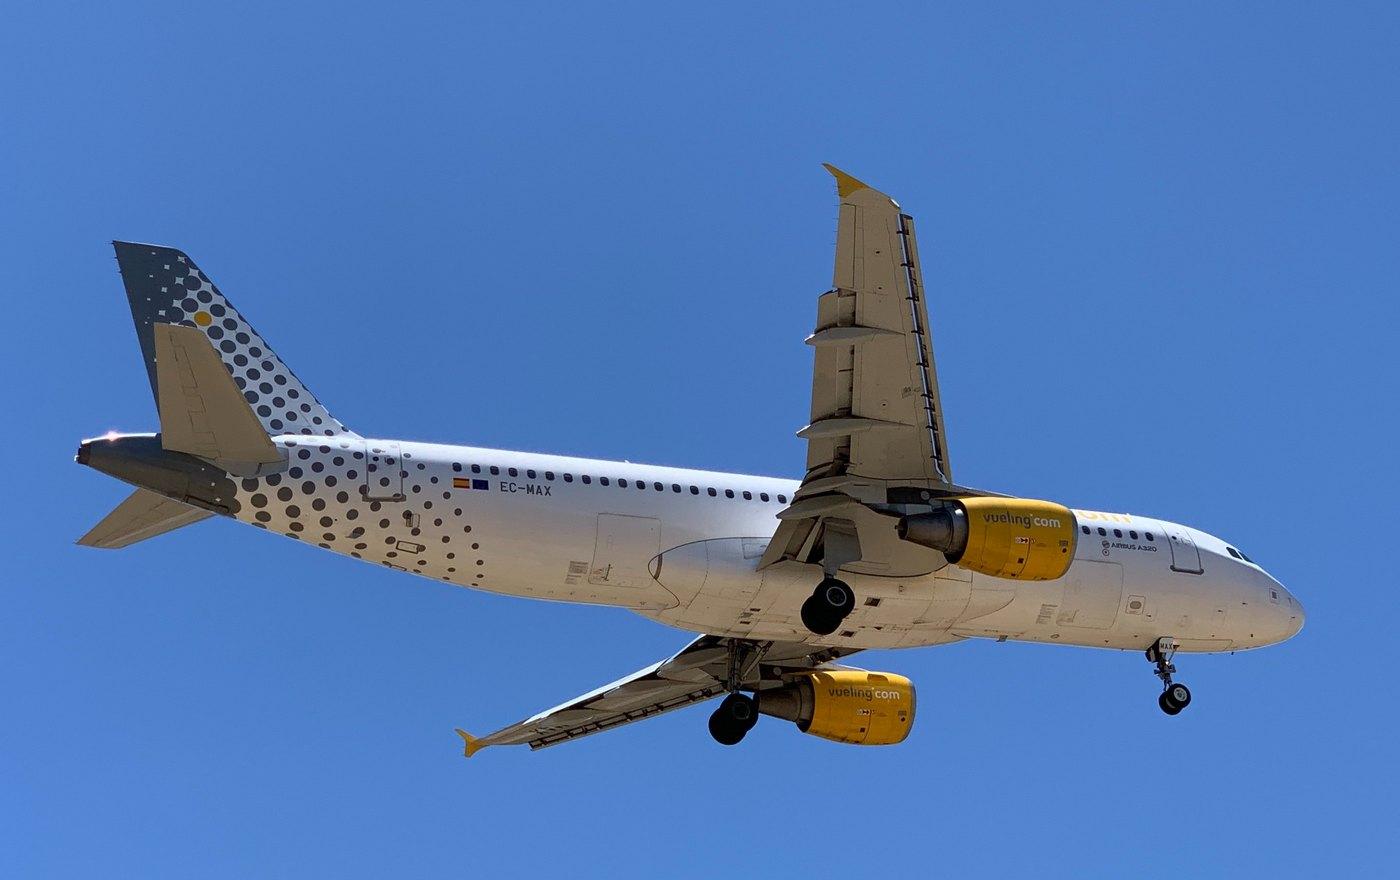 Vueling john cameron unsplash.jpg - Travel and Golf Influencer - AmerExperience Content Curator